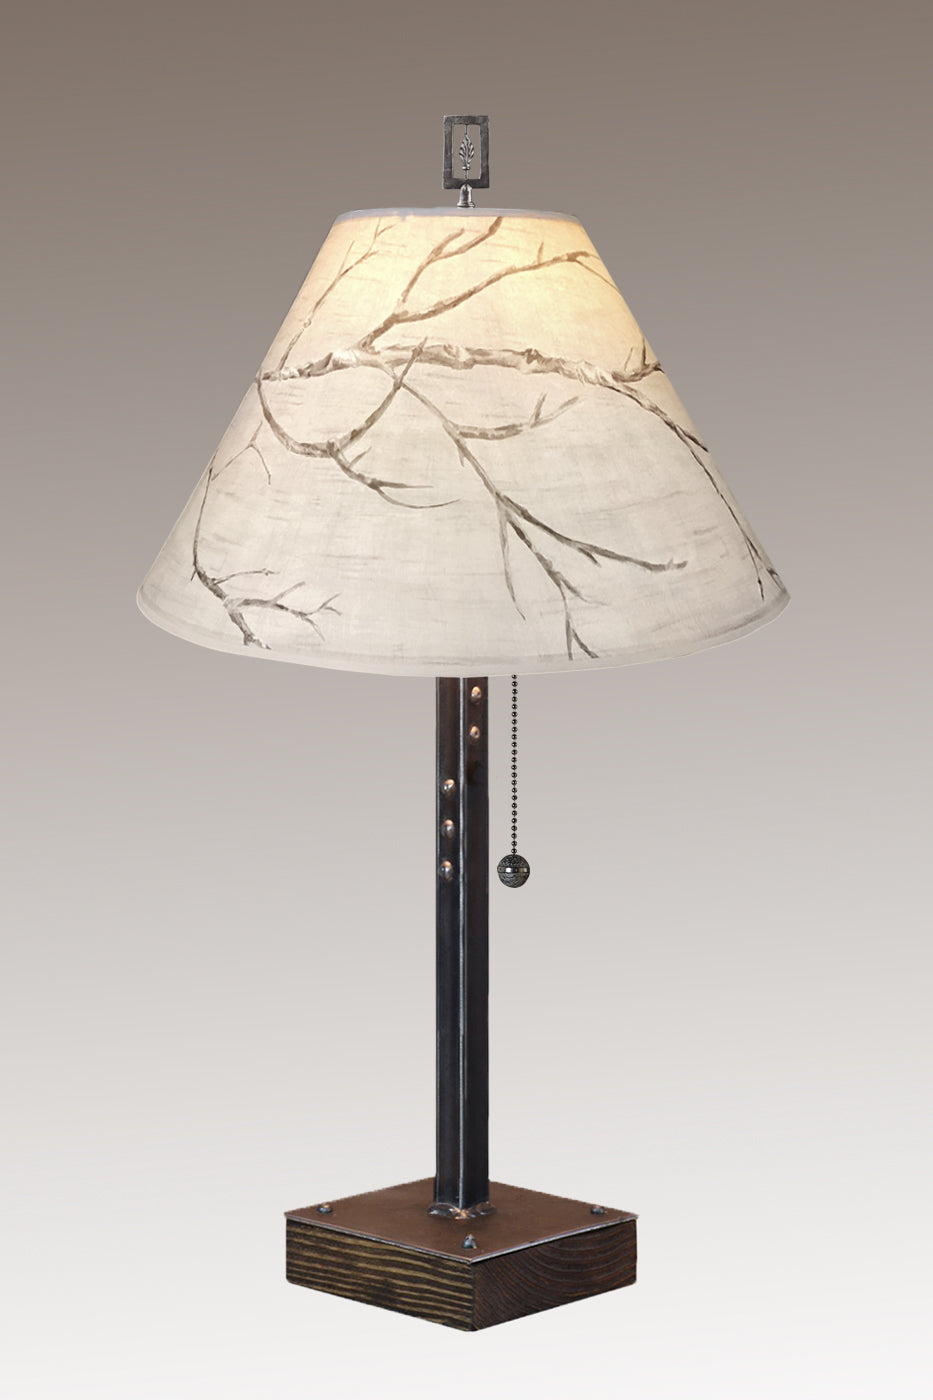 Steel Table Lamp on Wood with Medium Conical Shade in Sweeping Branch